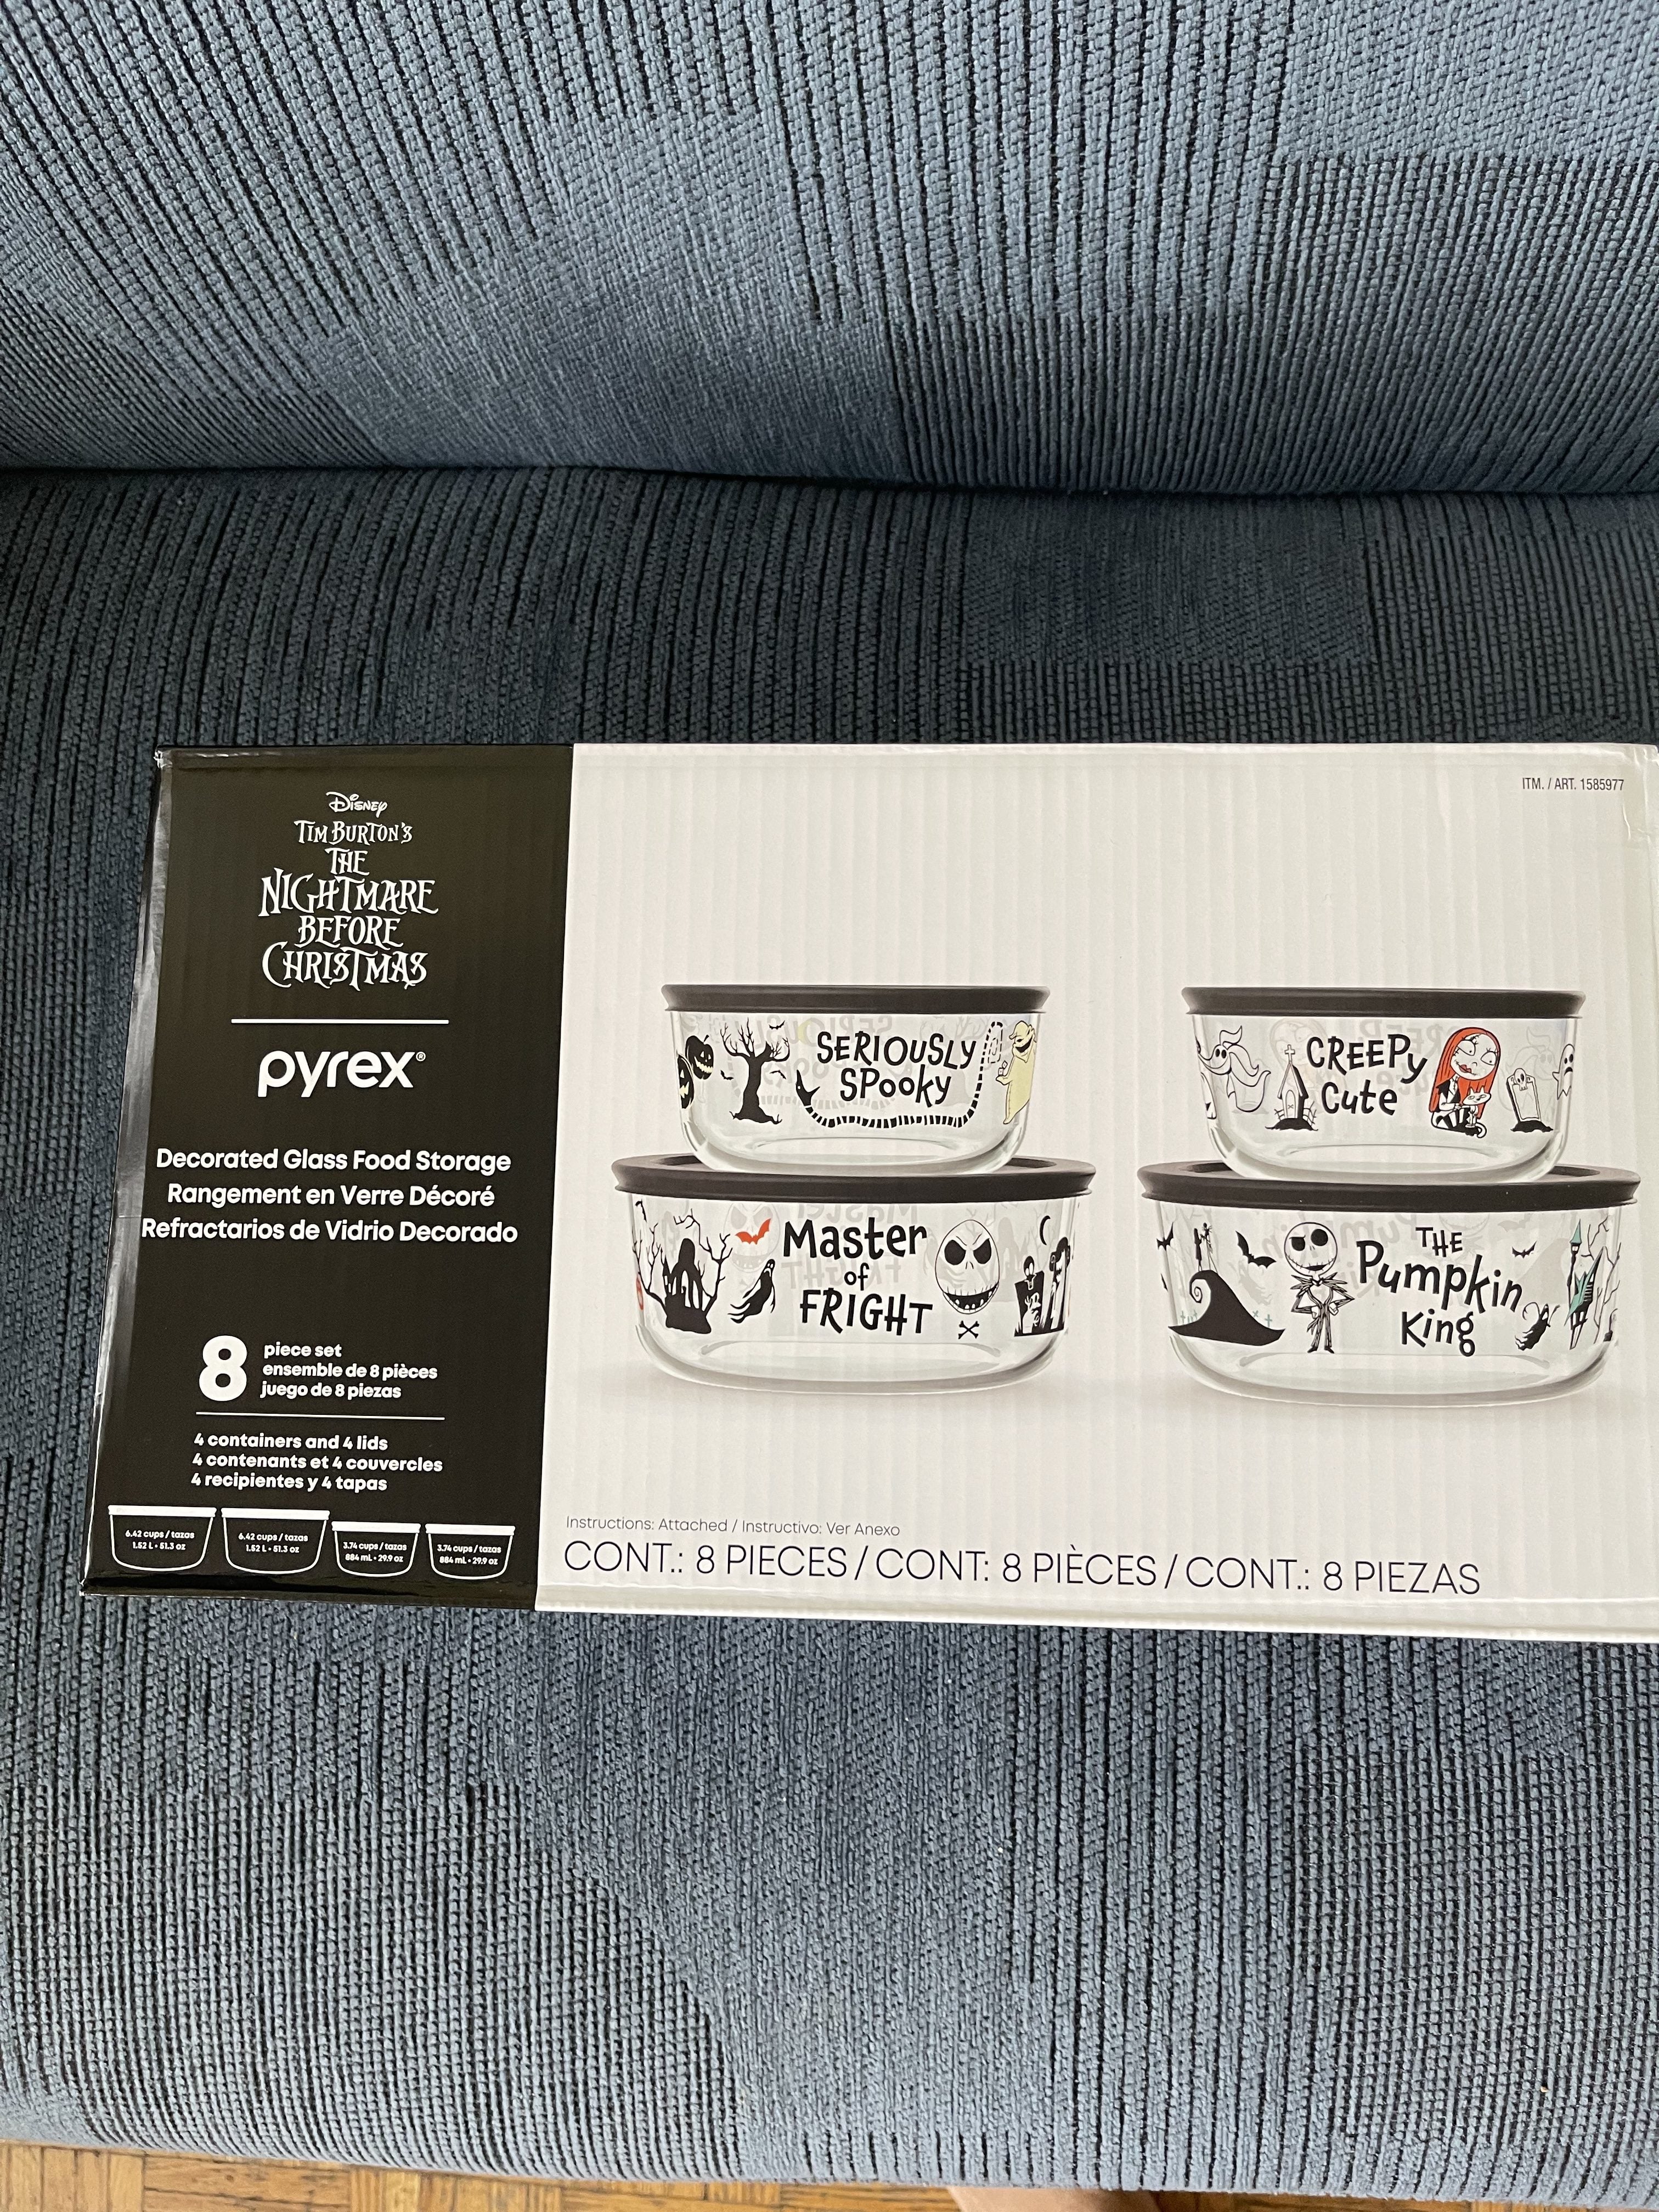 Minnie Mouse Pyrex Collection Spotted at Costco - home 